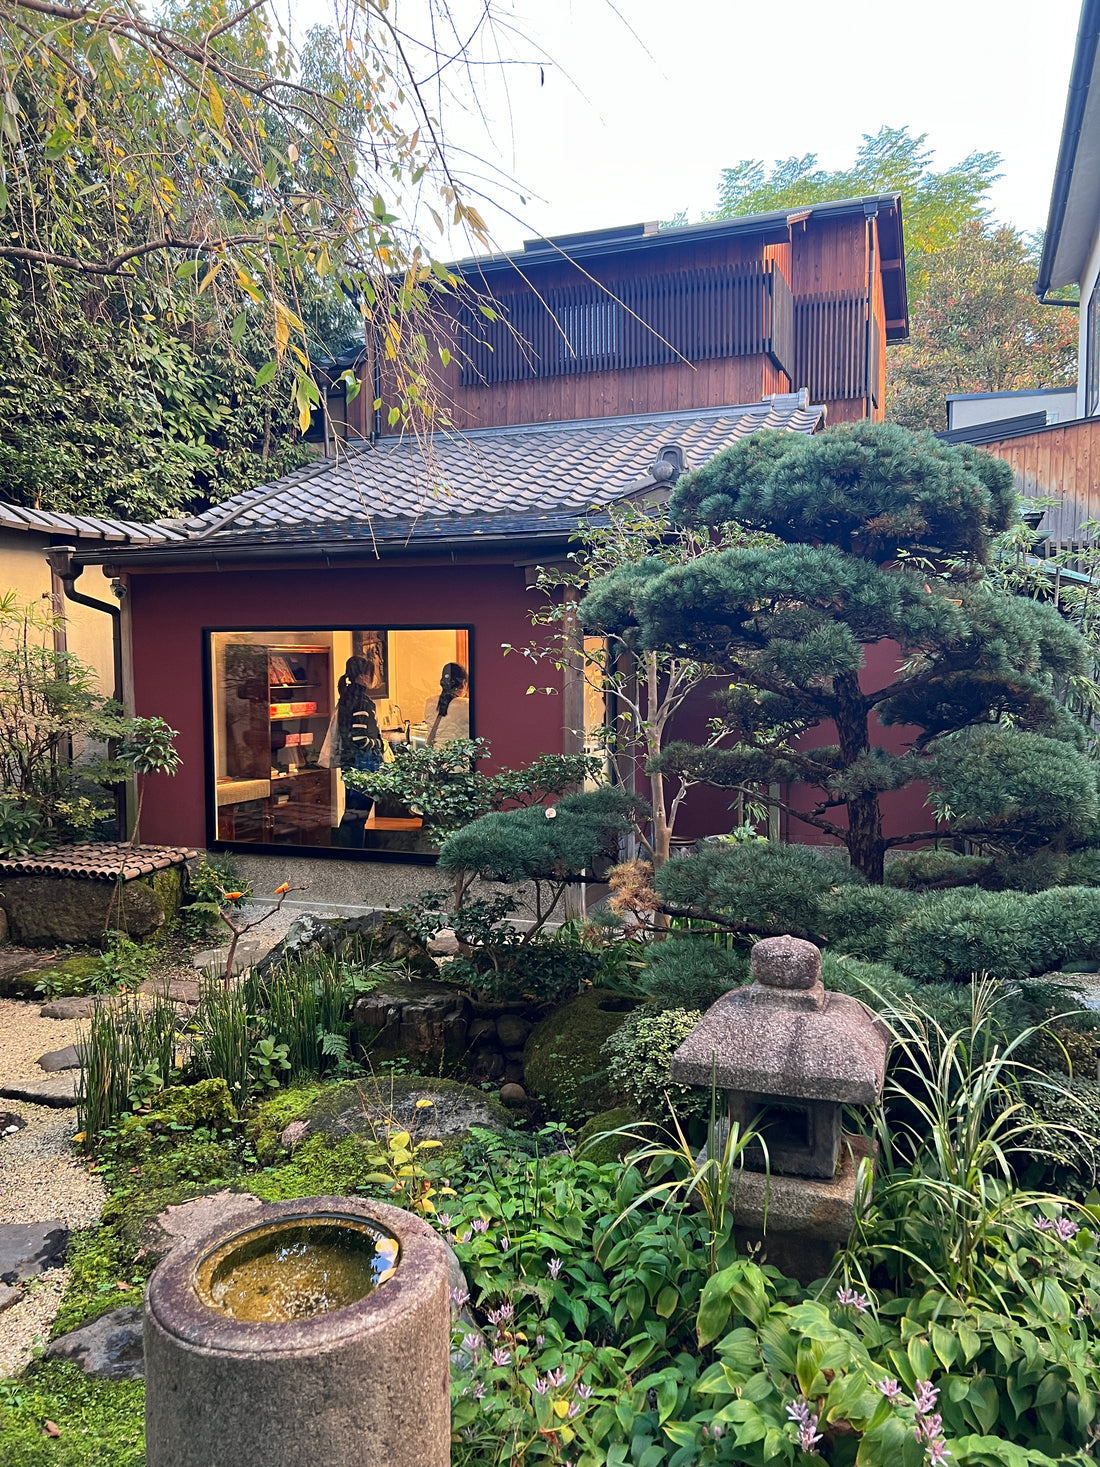 The exterior of a needle shop located within a Japanese garden